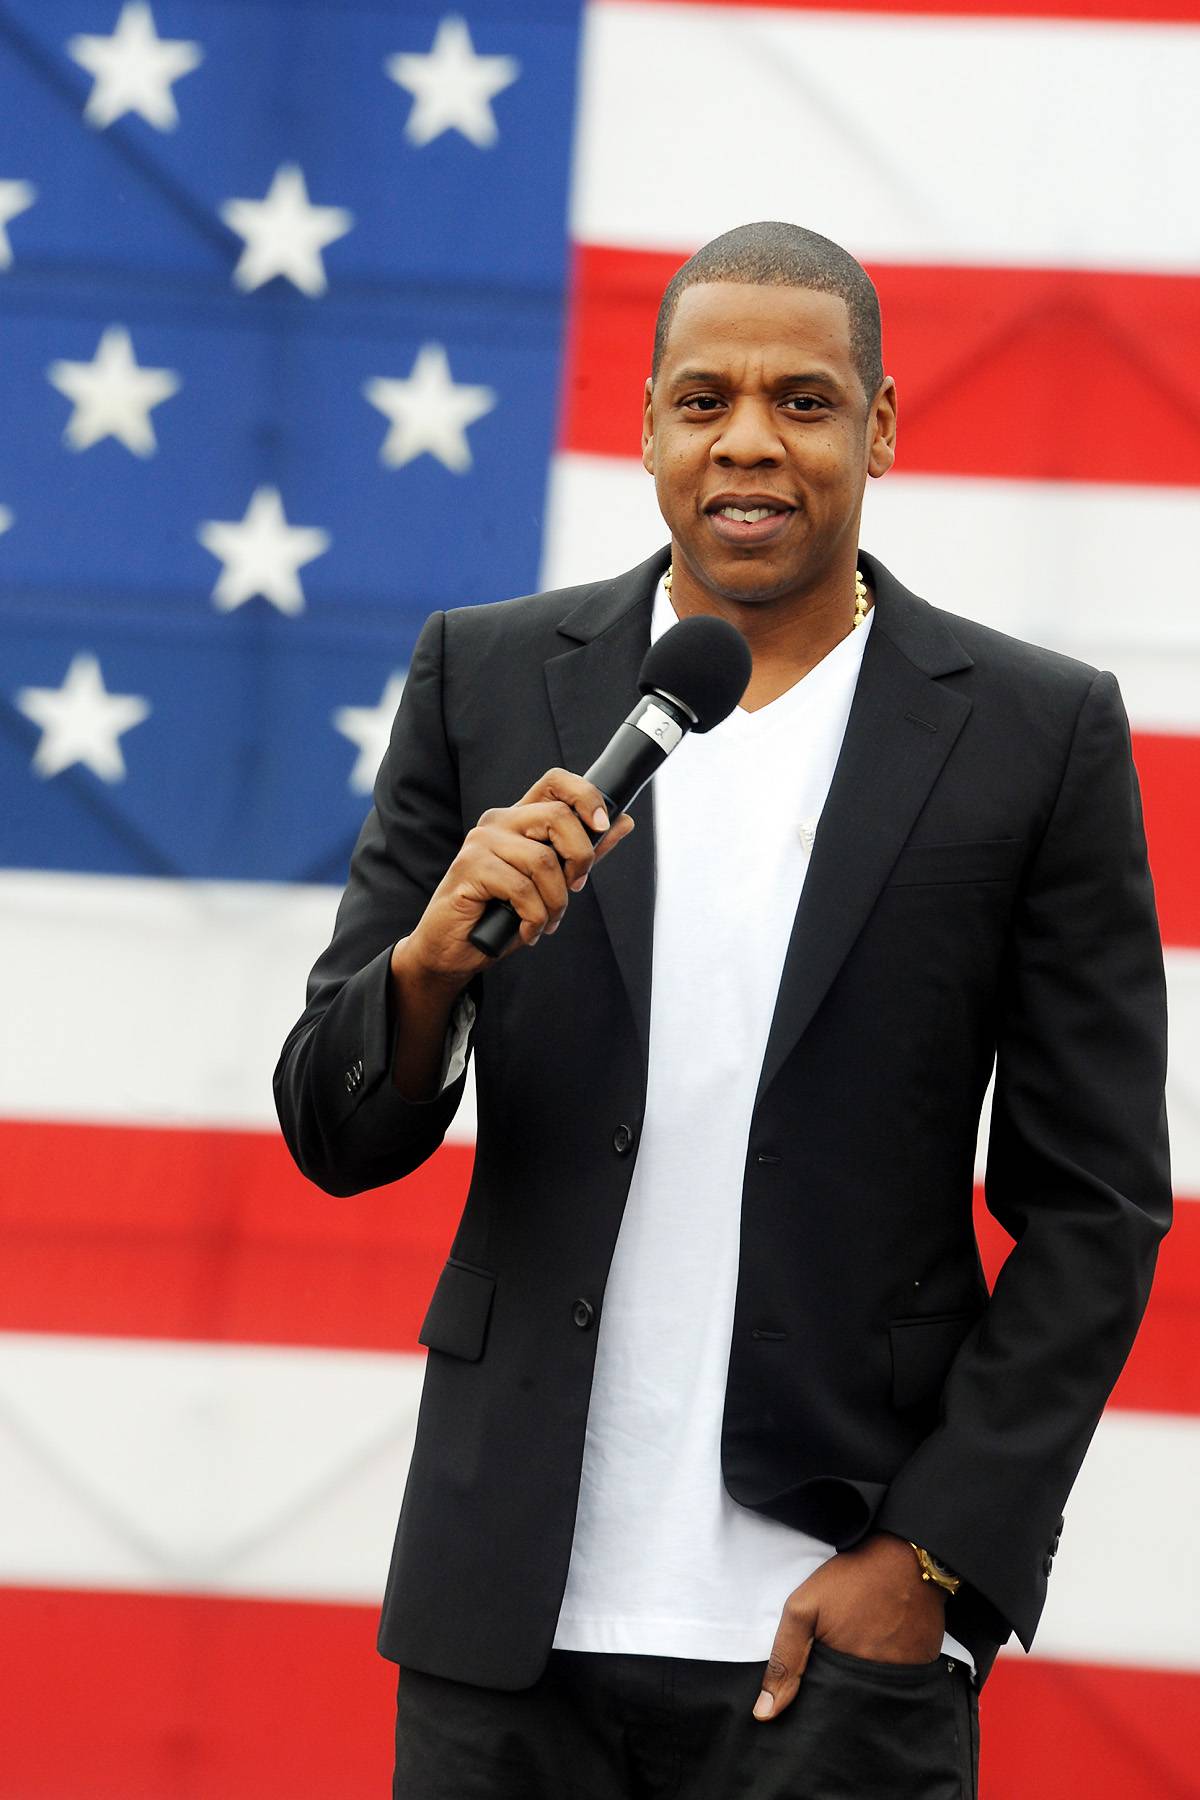 Jigga for President - Jay-Z looks like he's got political aspirations at his press conference on the steps of the Philadelphia Museum of Art to announce that he will headline the &quot;Budweiser Made in America&quot; two-day music festival, which will take place this Labor Day weekend in Philadelphia.  (Photo: Hugh Dillon/WENN.com)